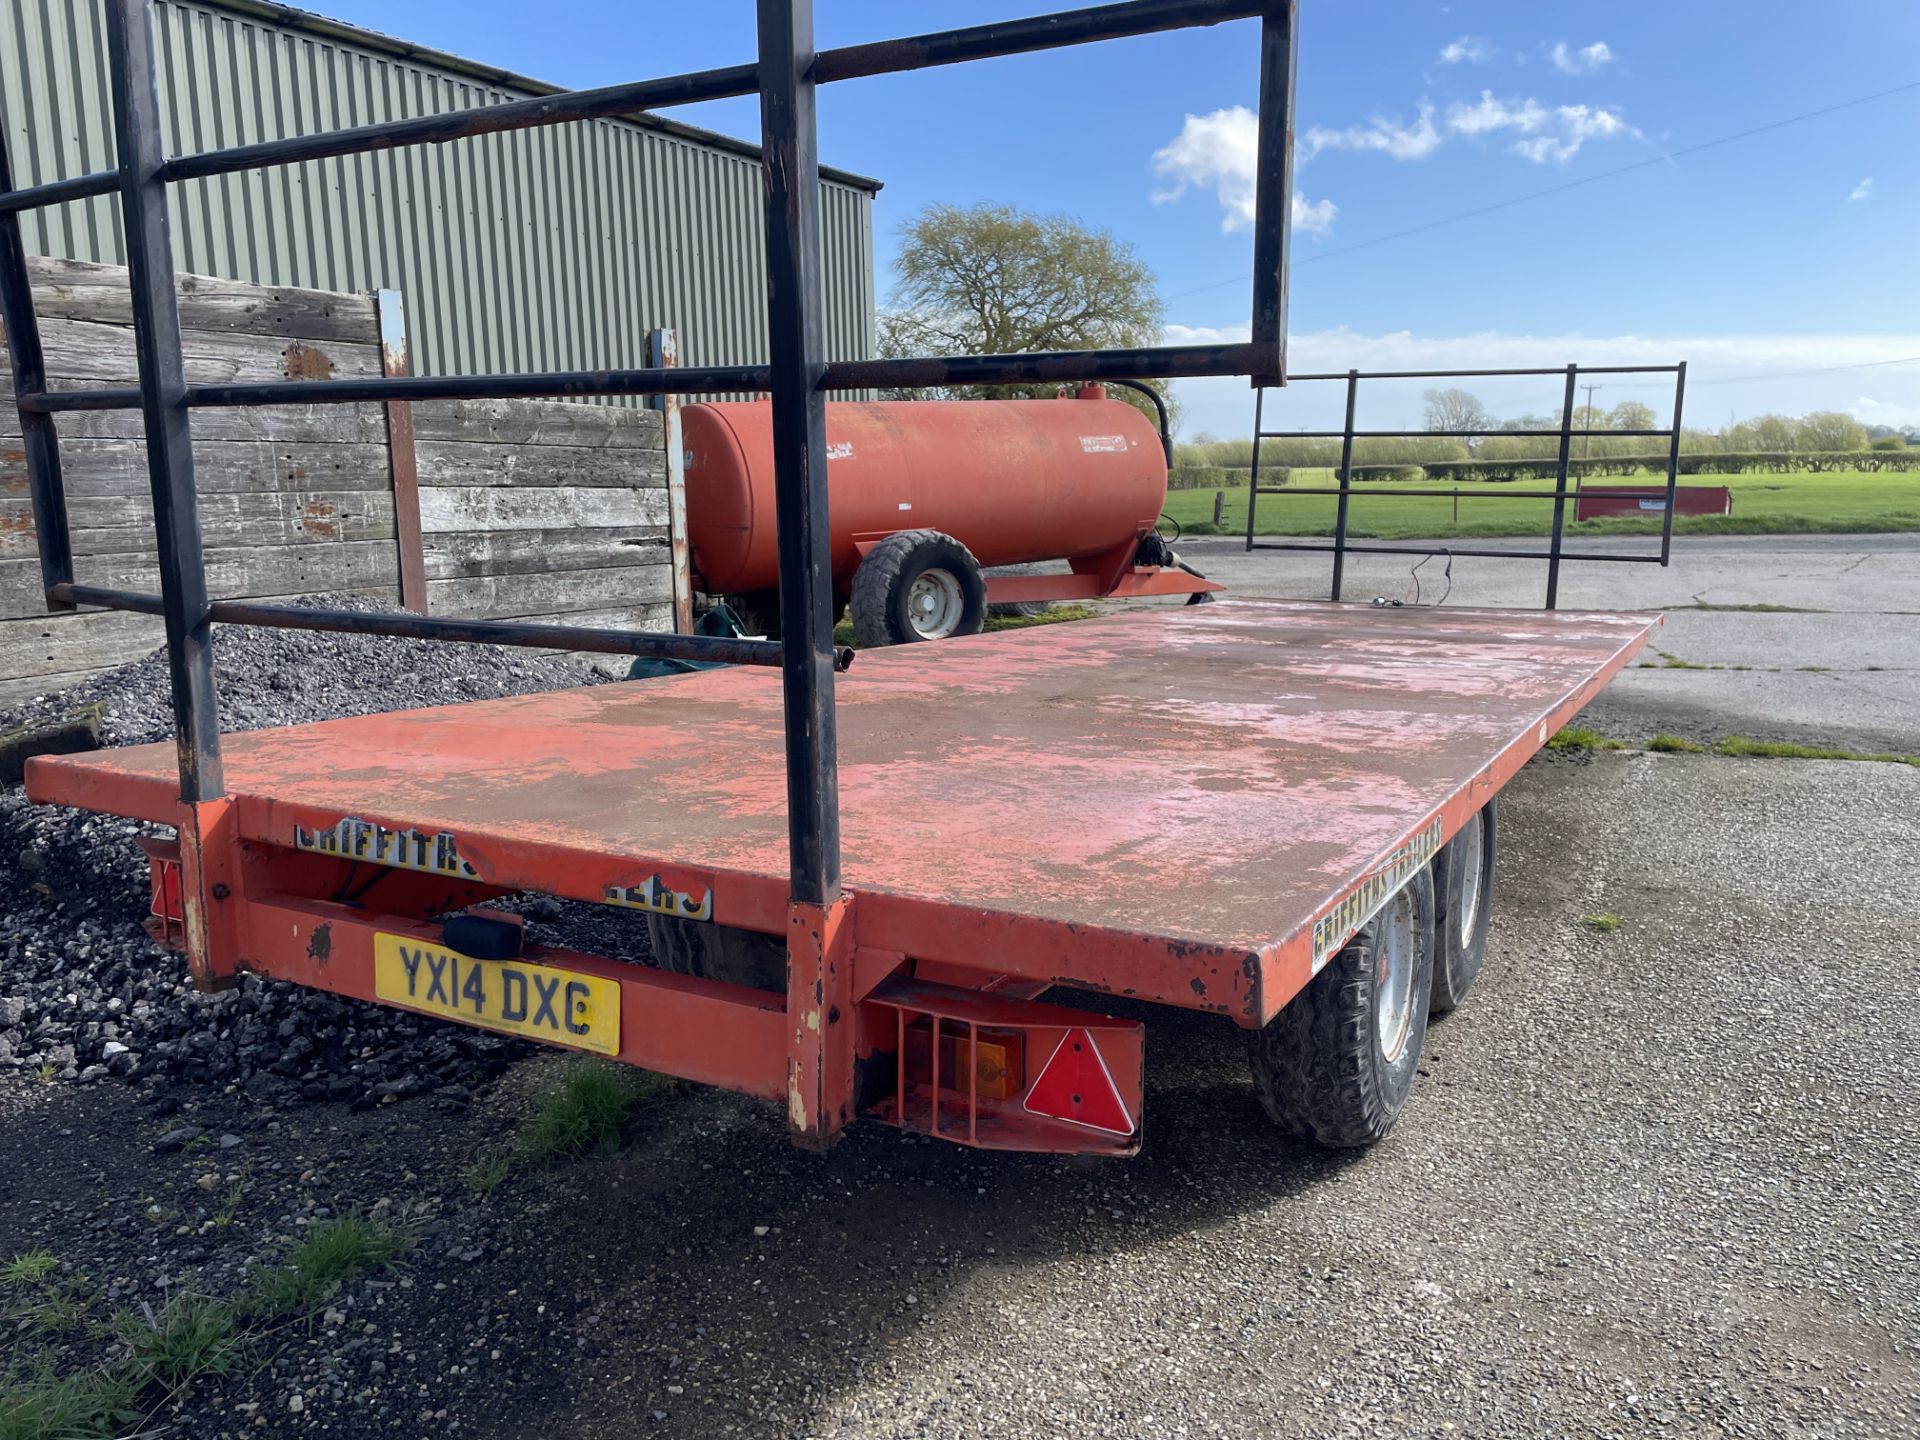 1995 Griffiths 8 ton 25' Bale Trailer with ladders front and rear - owned from new - Subject to VAT - Image 3 of 3